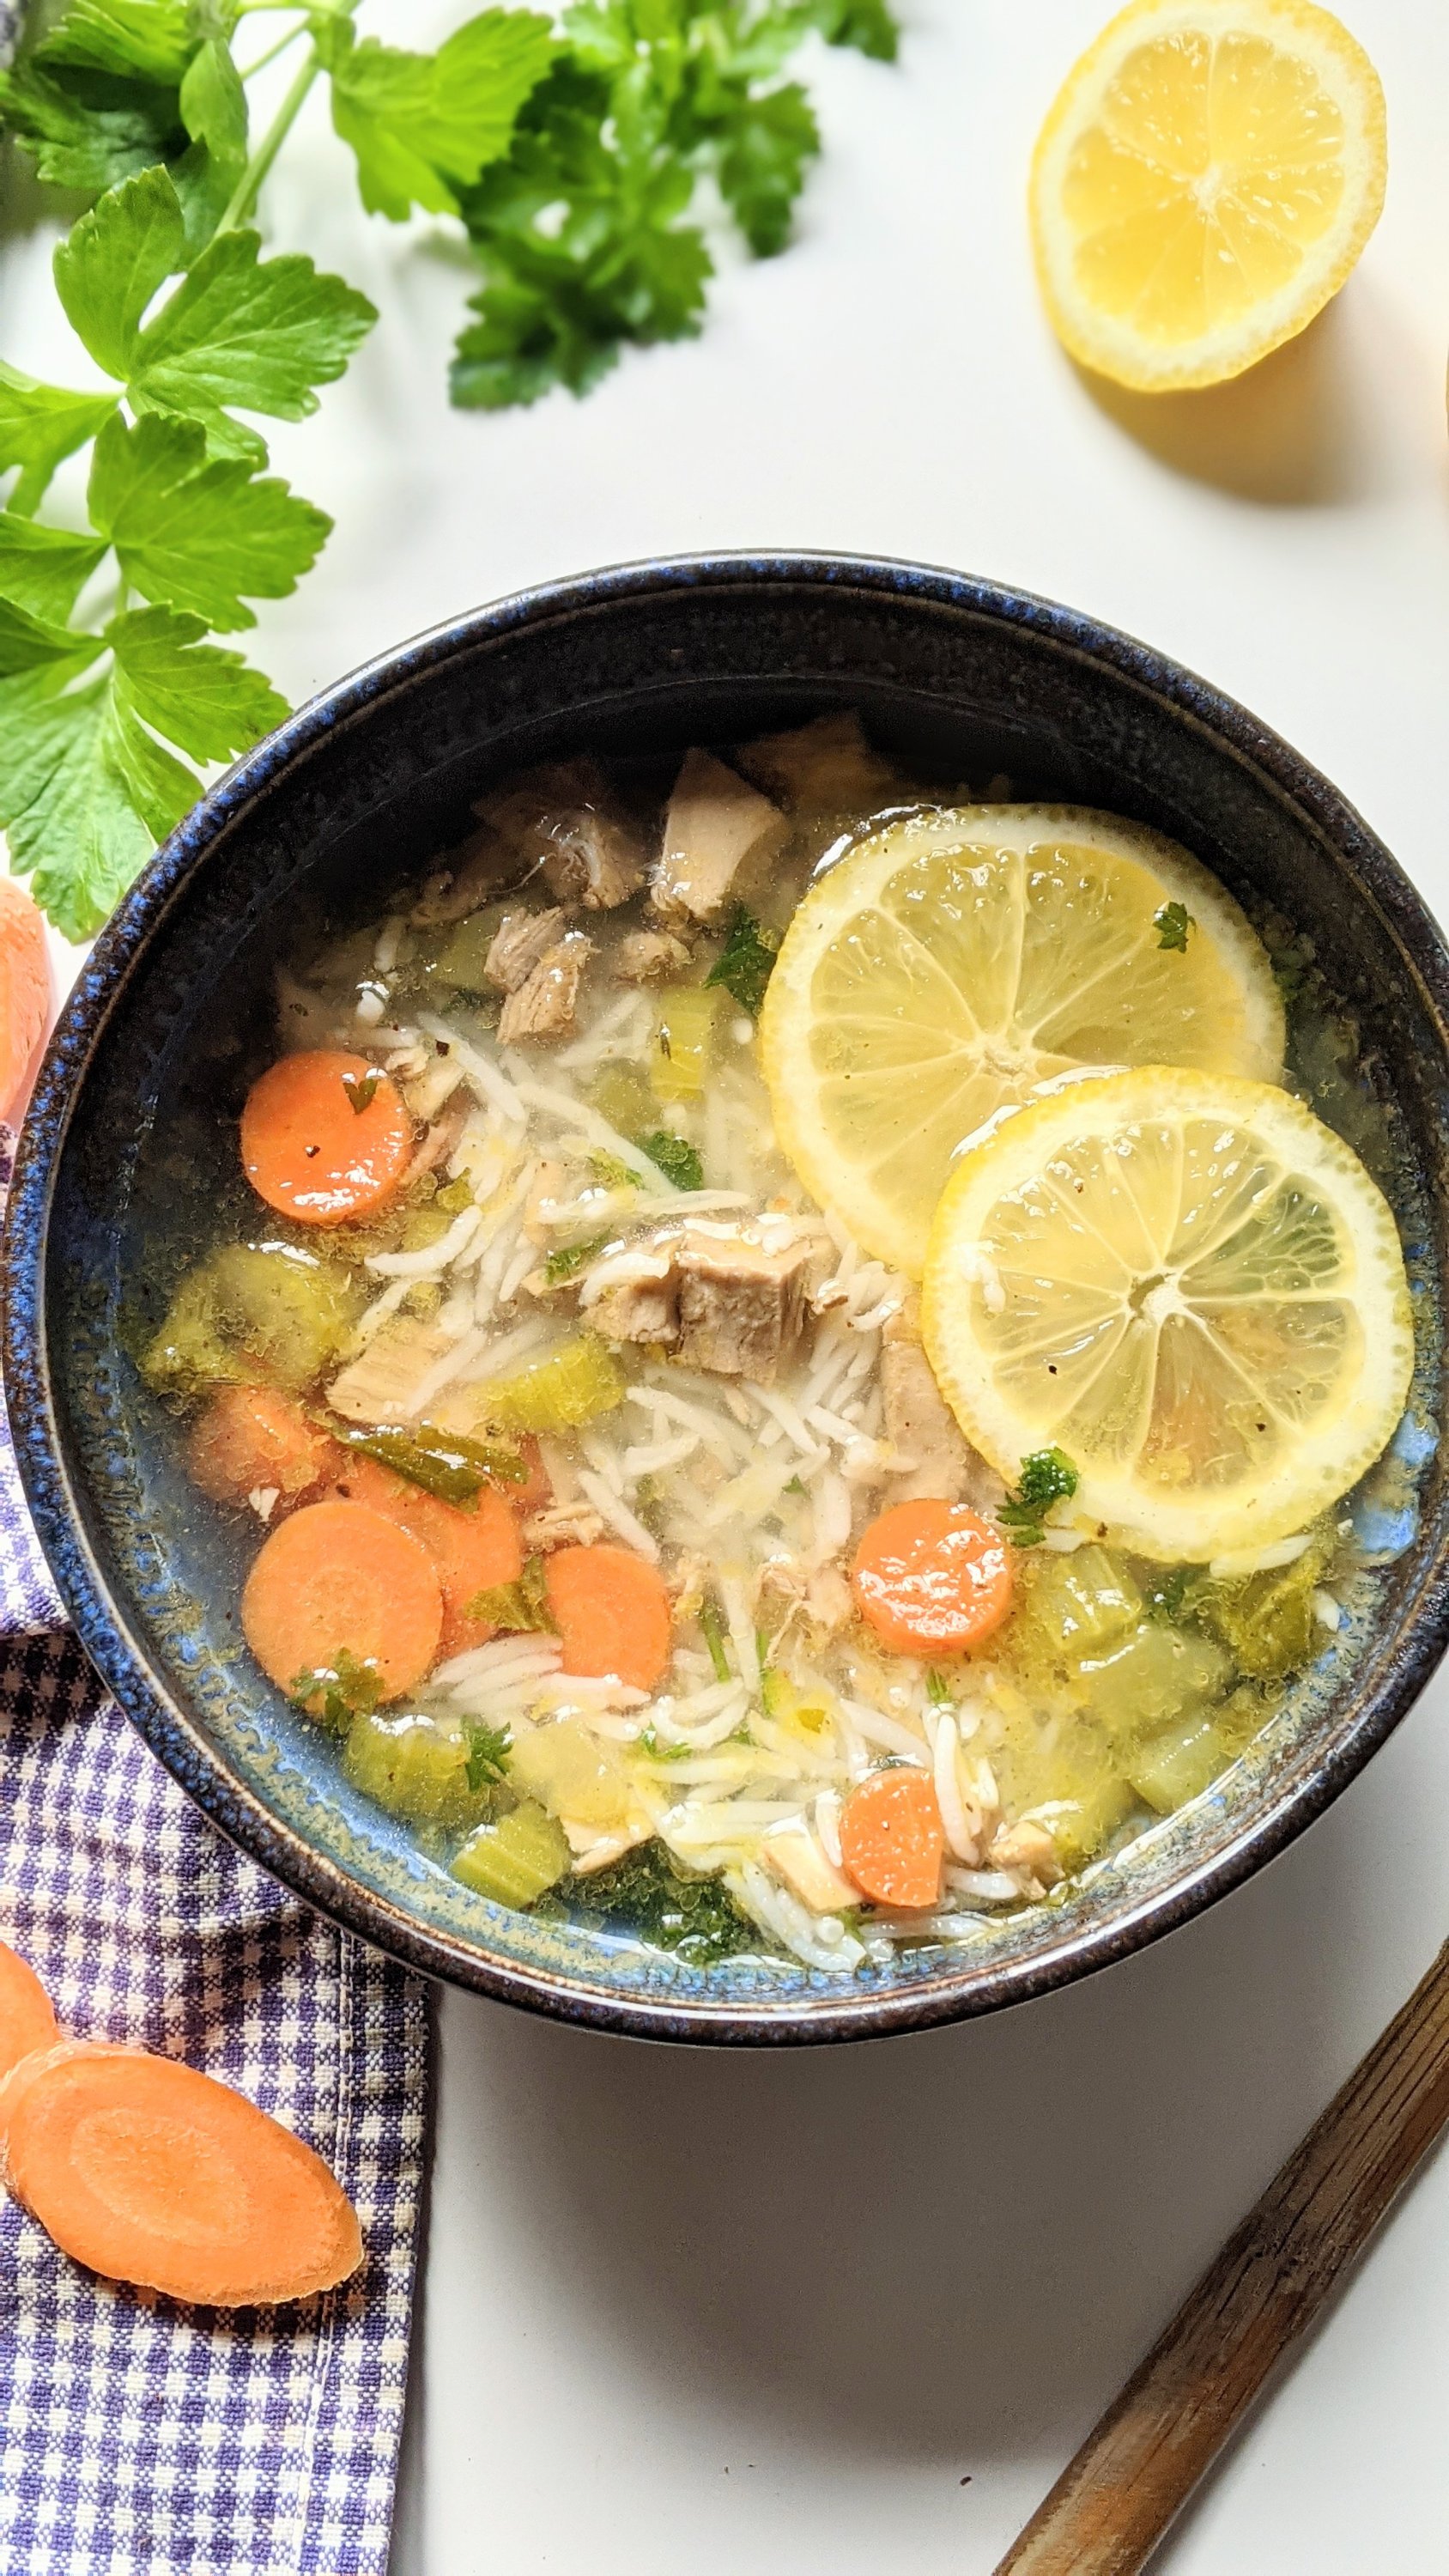 lemon turkey rice soup recipe with leftover thanksgiving turkey leftovers soup gluten free dairy free one pot turkey soup recipe healthy simple inexpensive no waste lunch or dinner ideas